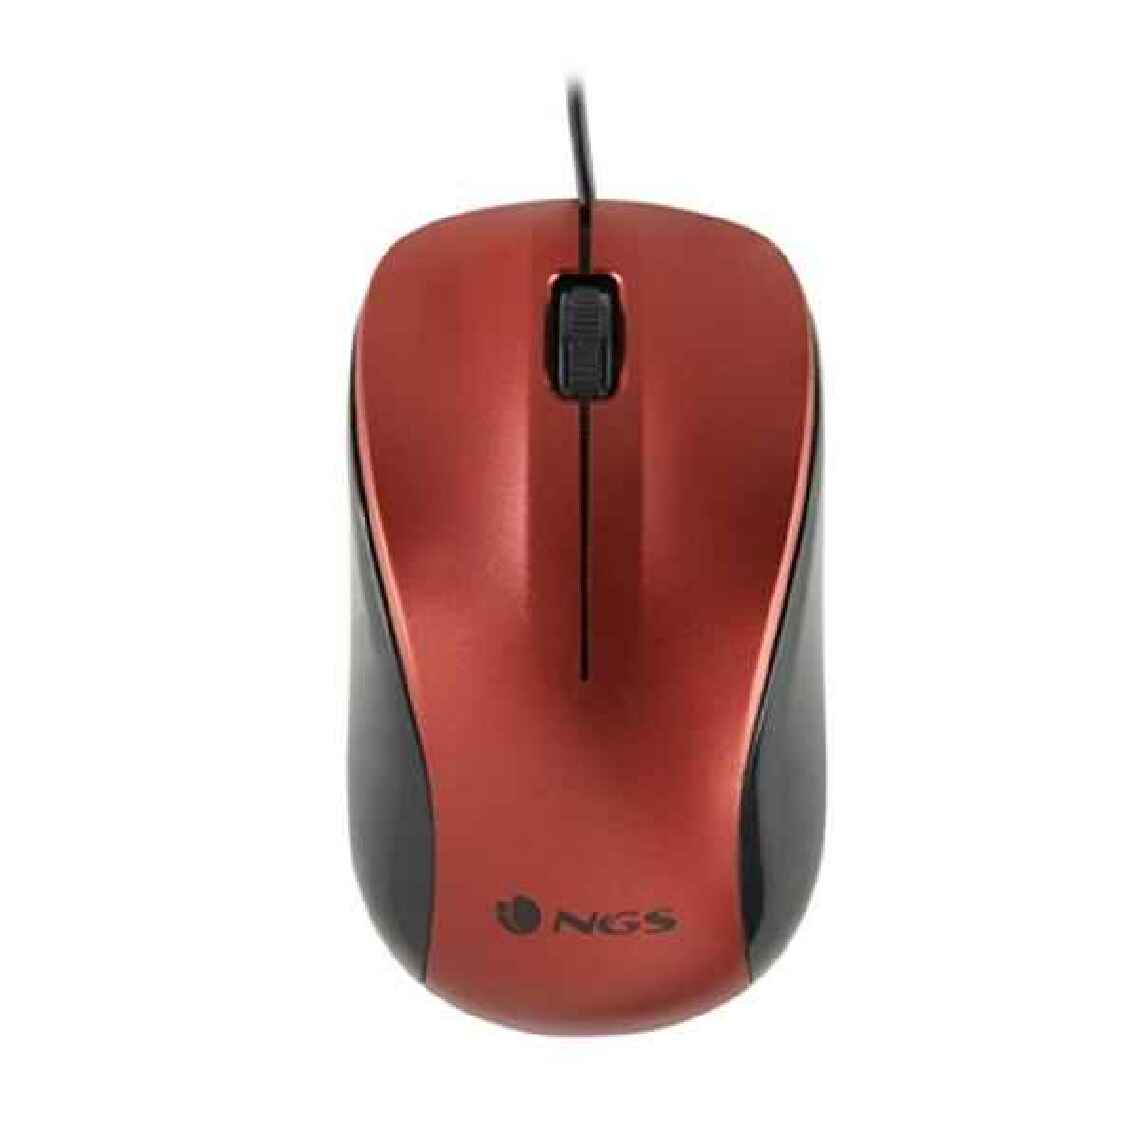 Ngs - Souris Optique NGS WIRED 1200 DPI Rouge - Souris